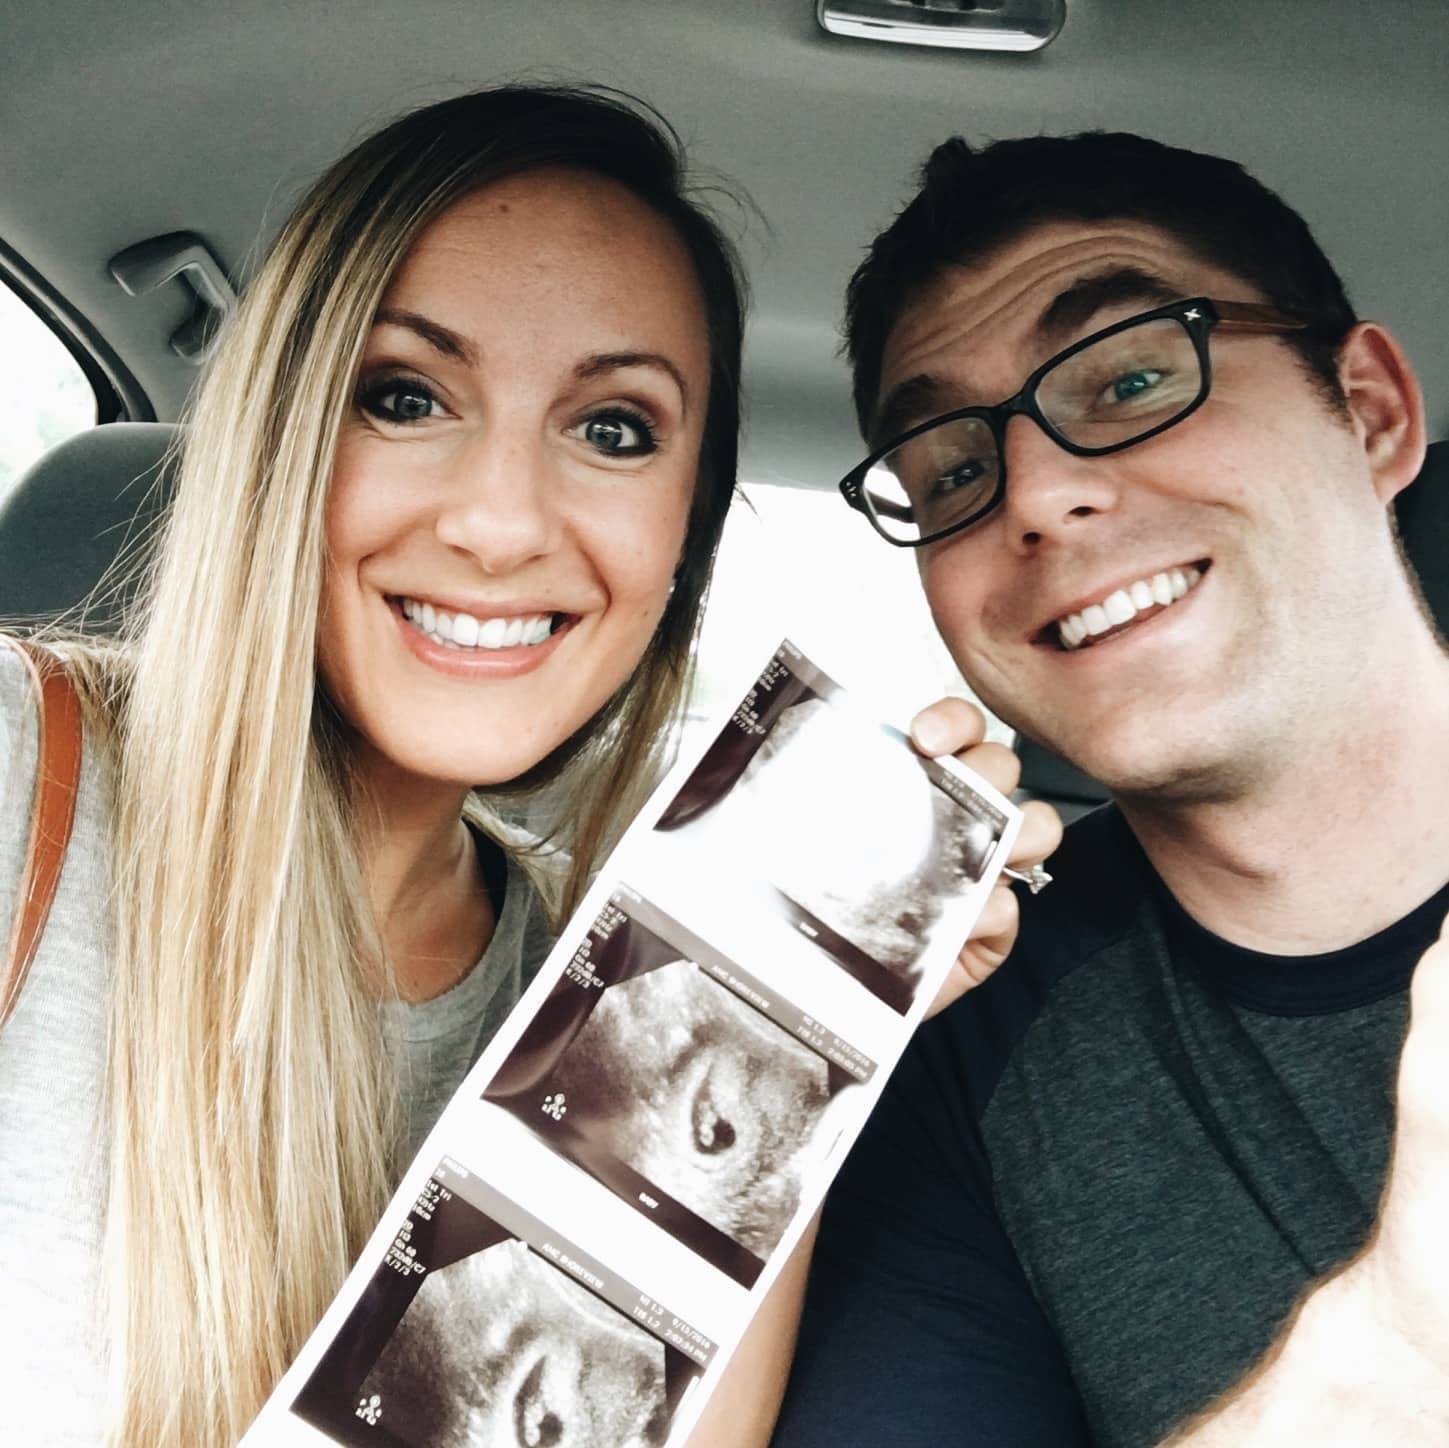 A man and a woman holding ultrasound photos.